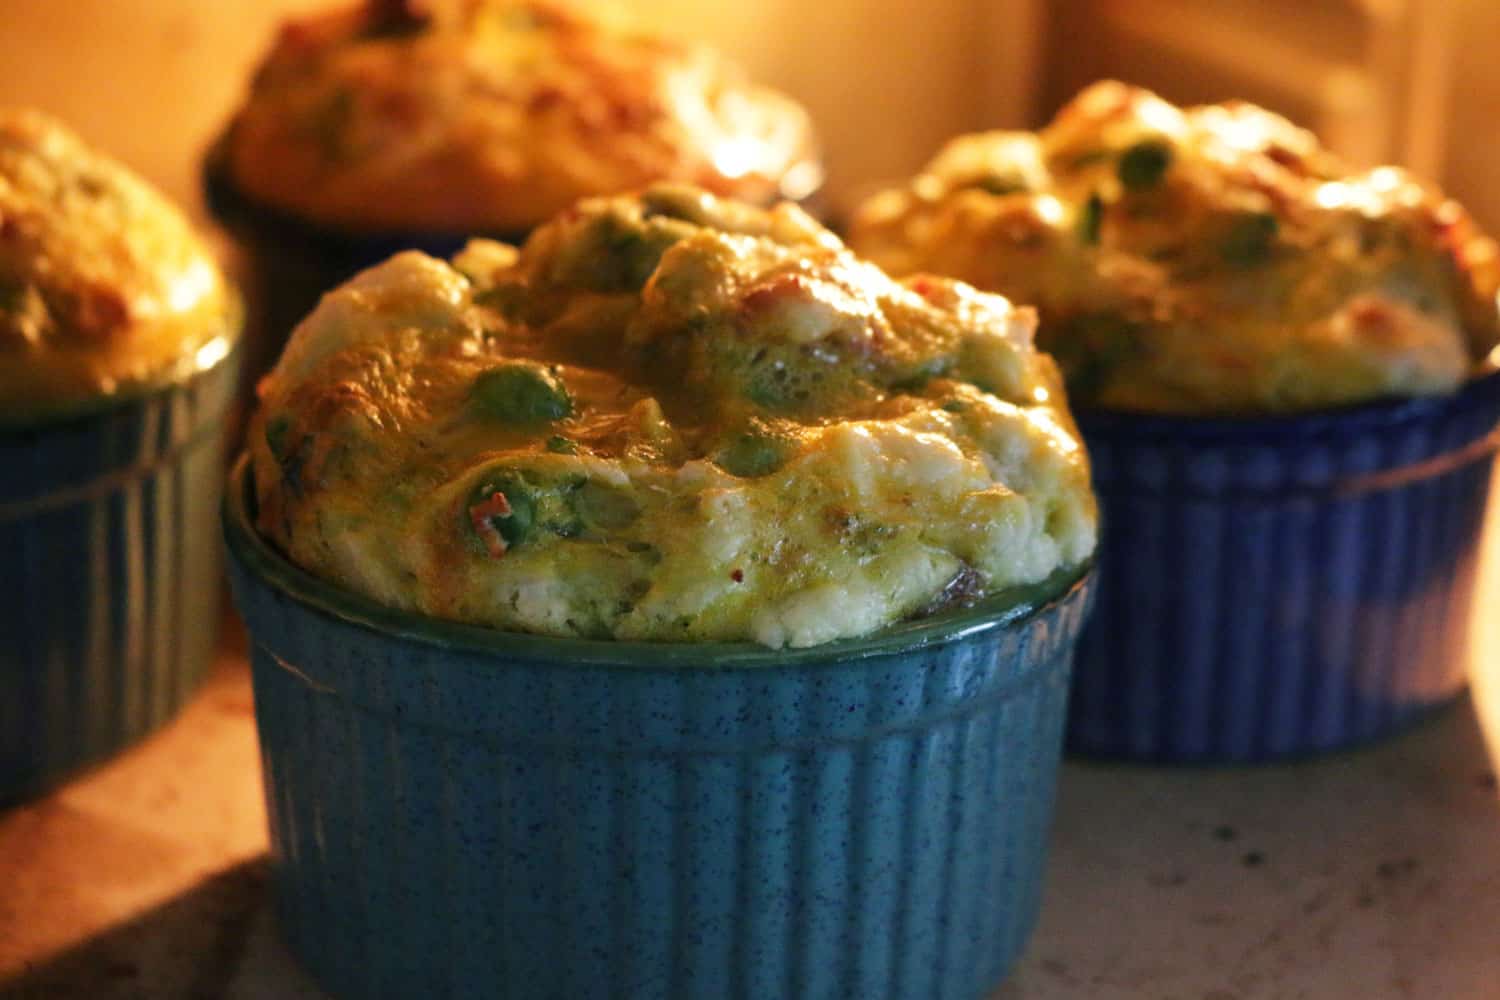 Close-up image of homemade egg and spinach breakfast muffins served in blue ramekin dishes in hot oven, home baking